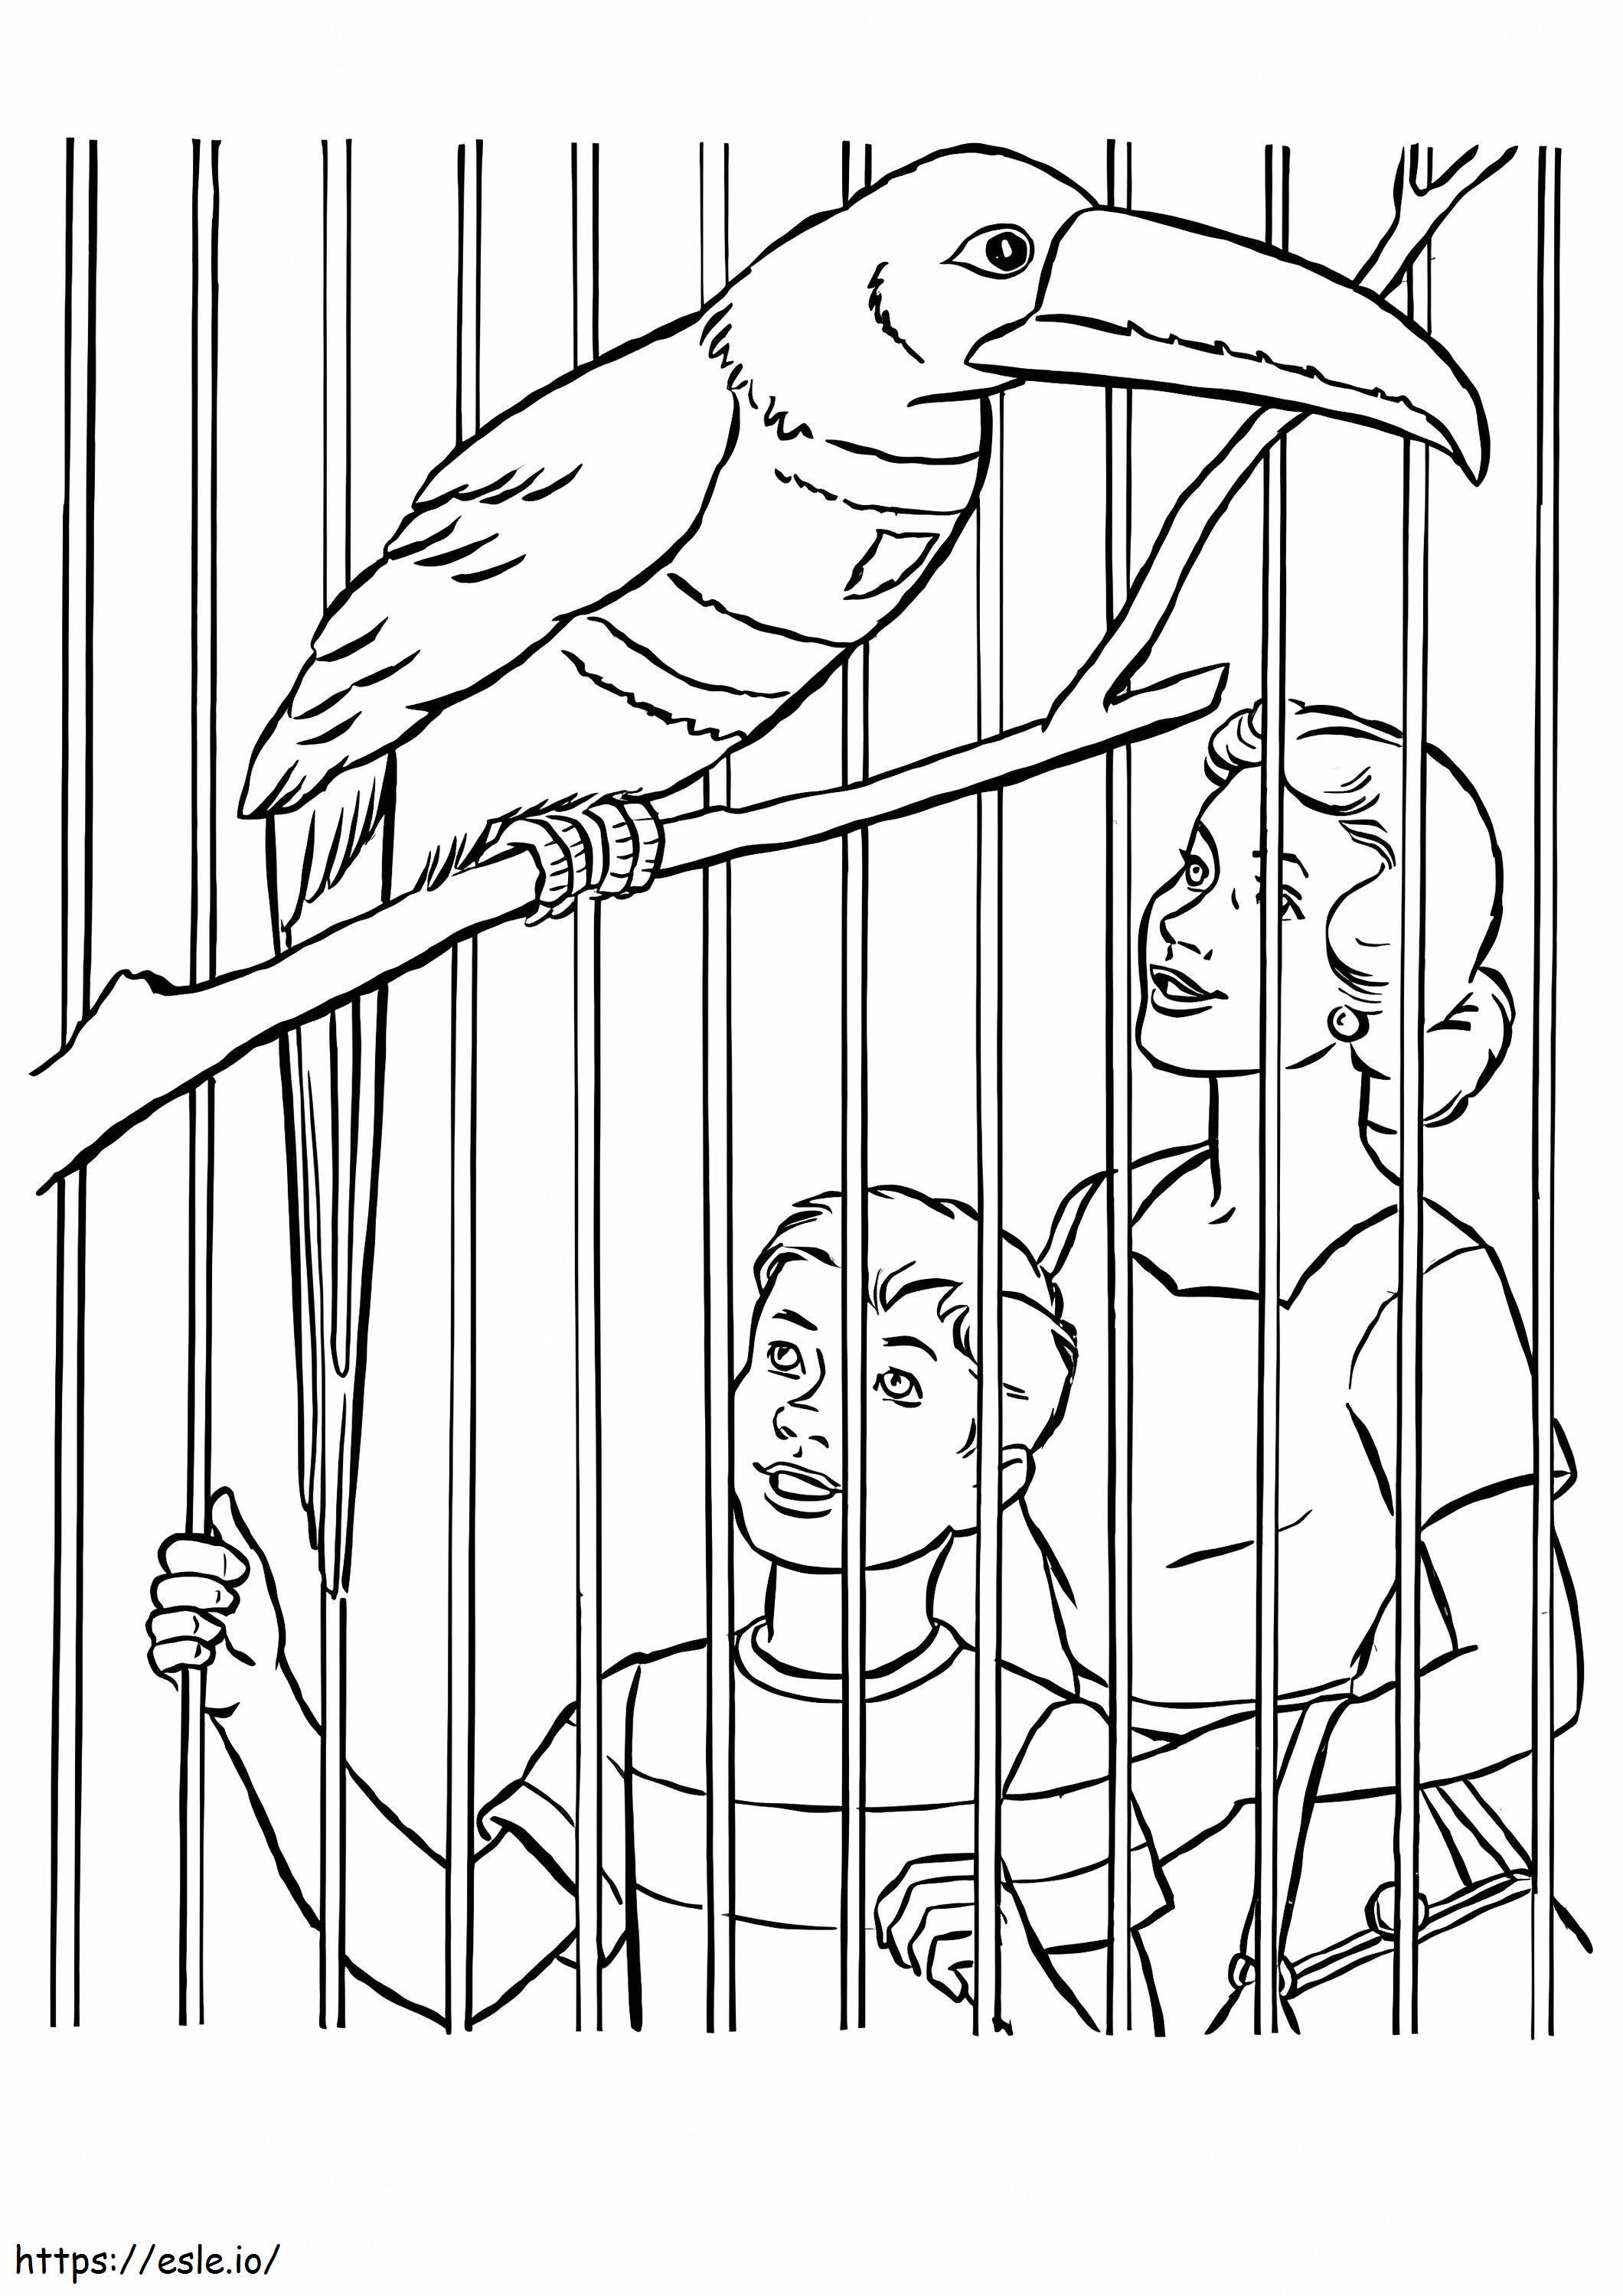 Toucan In A Zoo coloring page